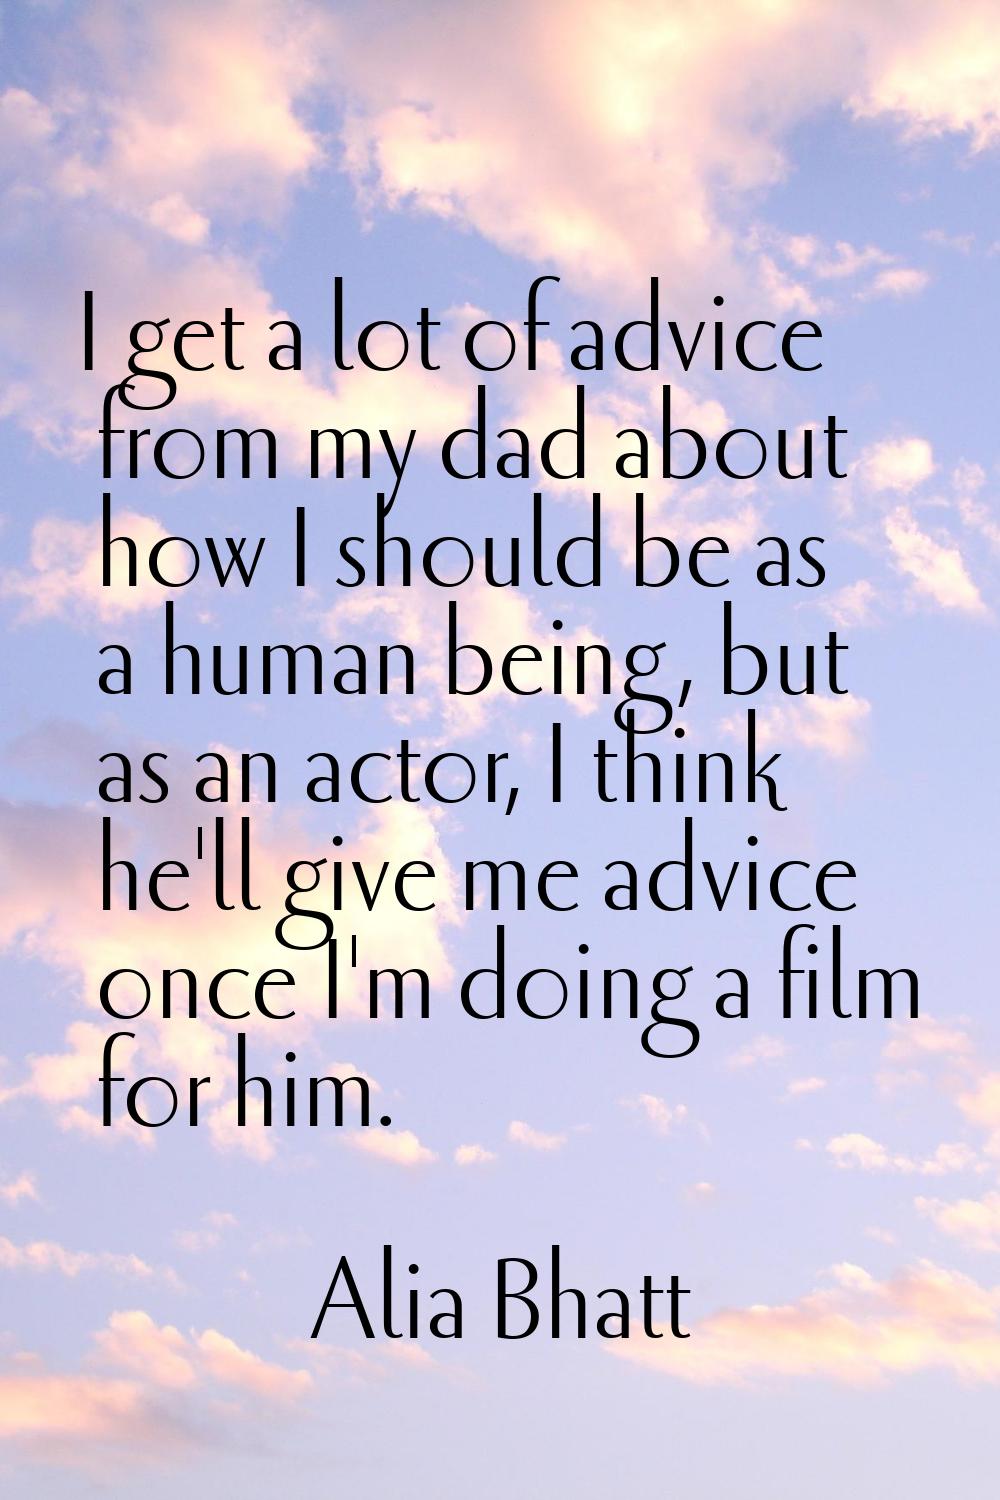 I get a lot of advice from my dad about how I should be as a human being, but as an actor, I think 